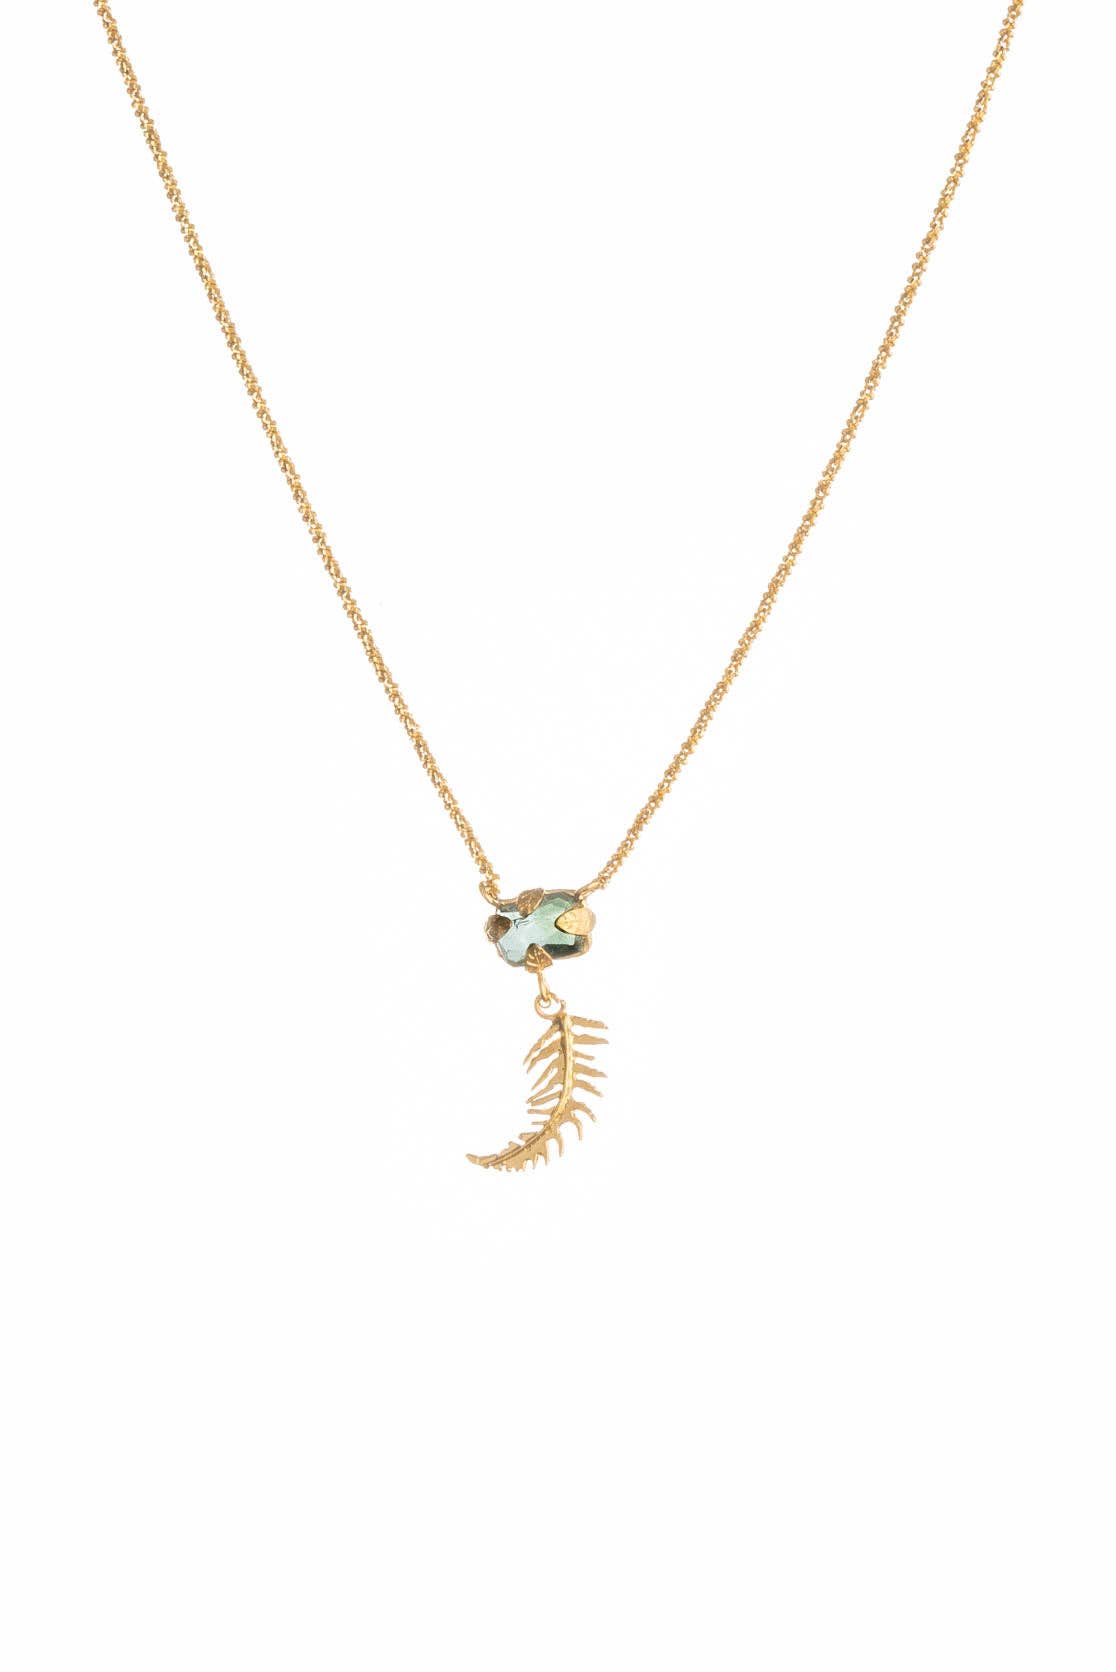 Green Tourmaline Necklace with Fern Drop in Gold